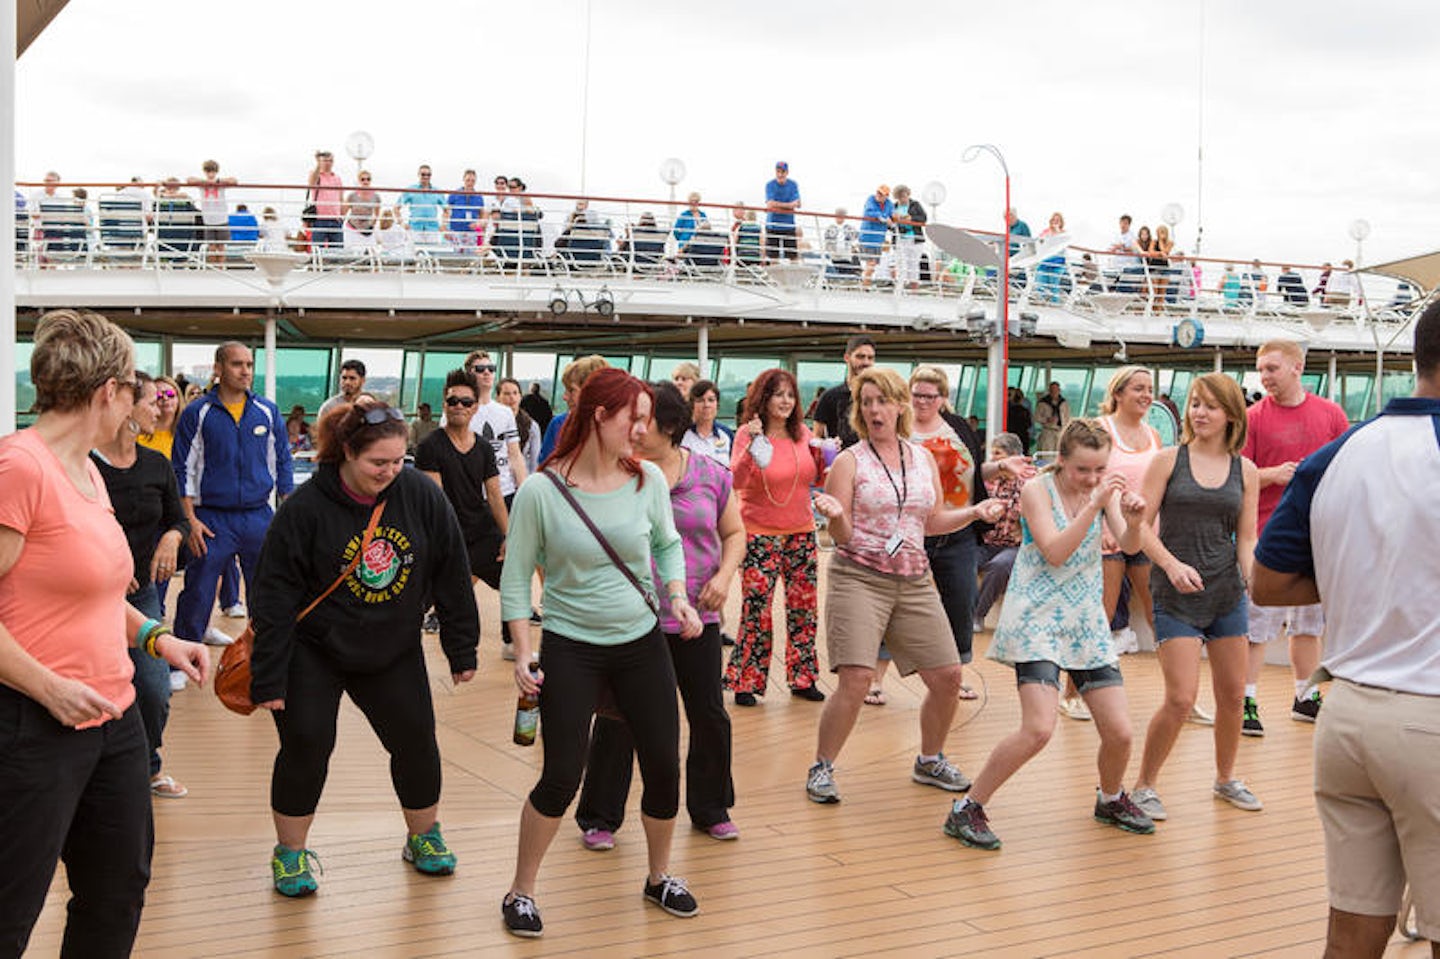 Sailaway Deck Party on Vision of the Seas